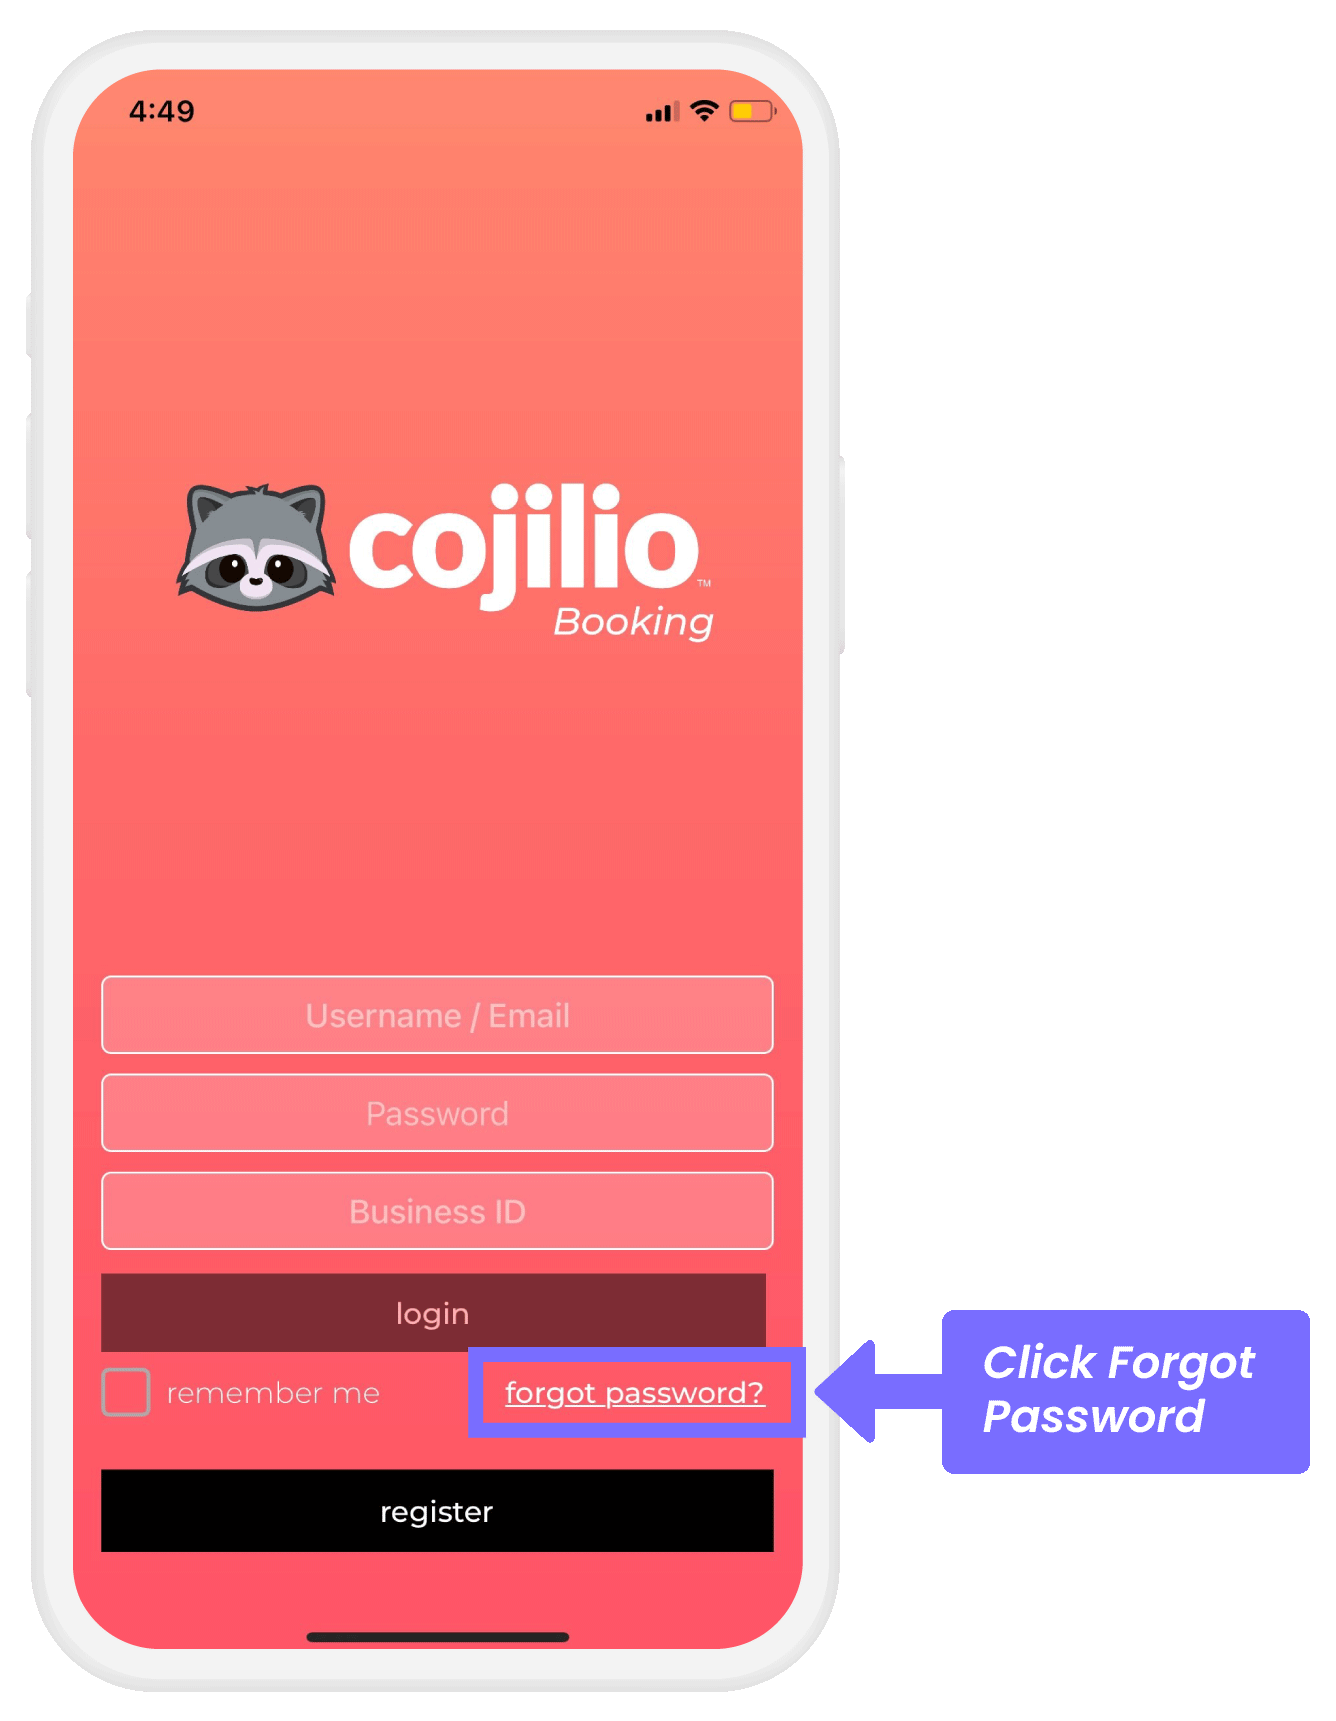 Cojilio-Booking_How-to-change-and-reset-appointment-1.png